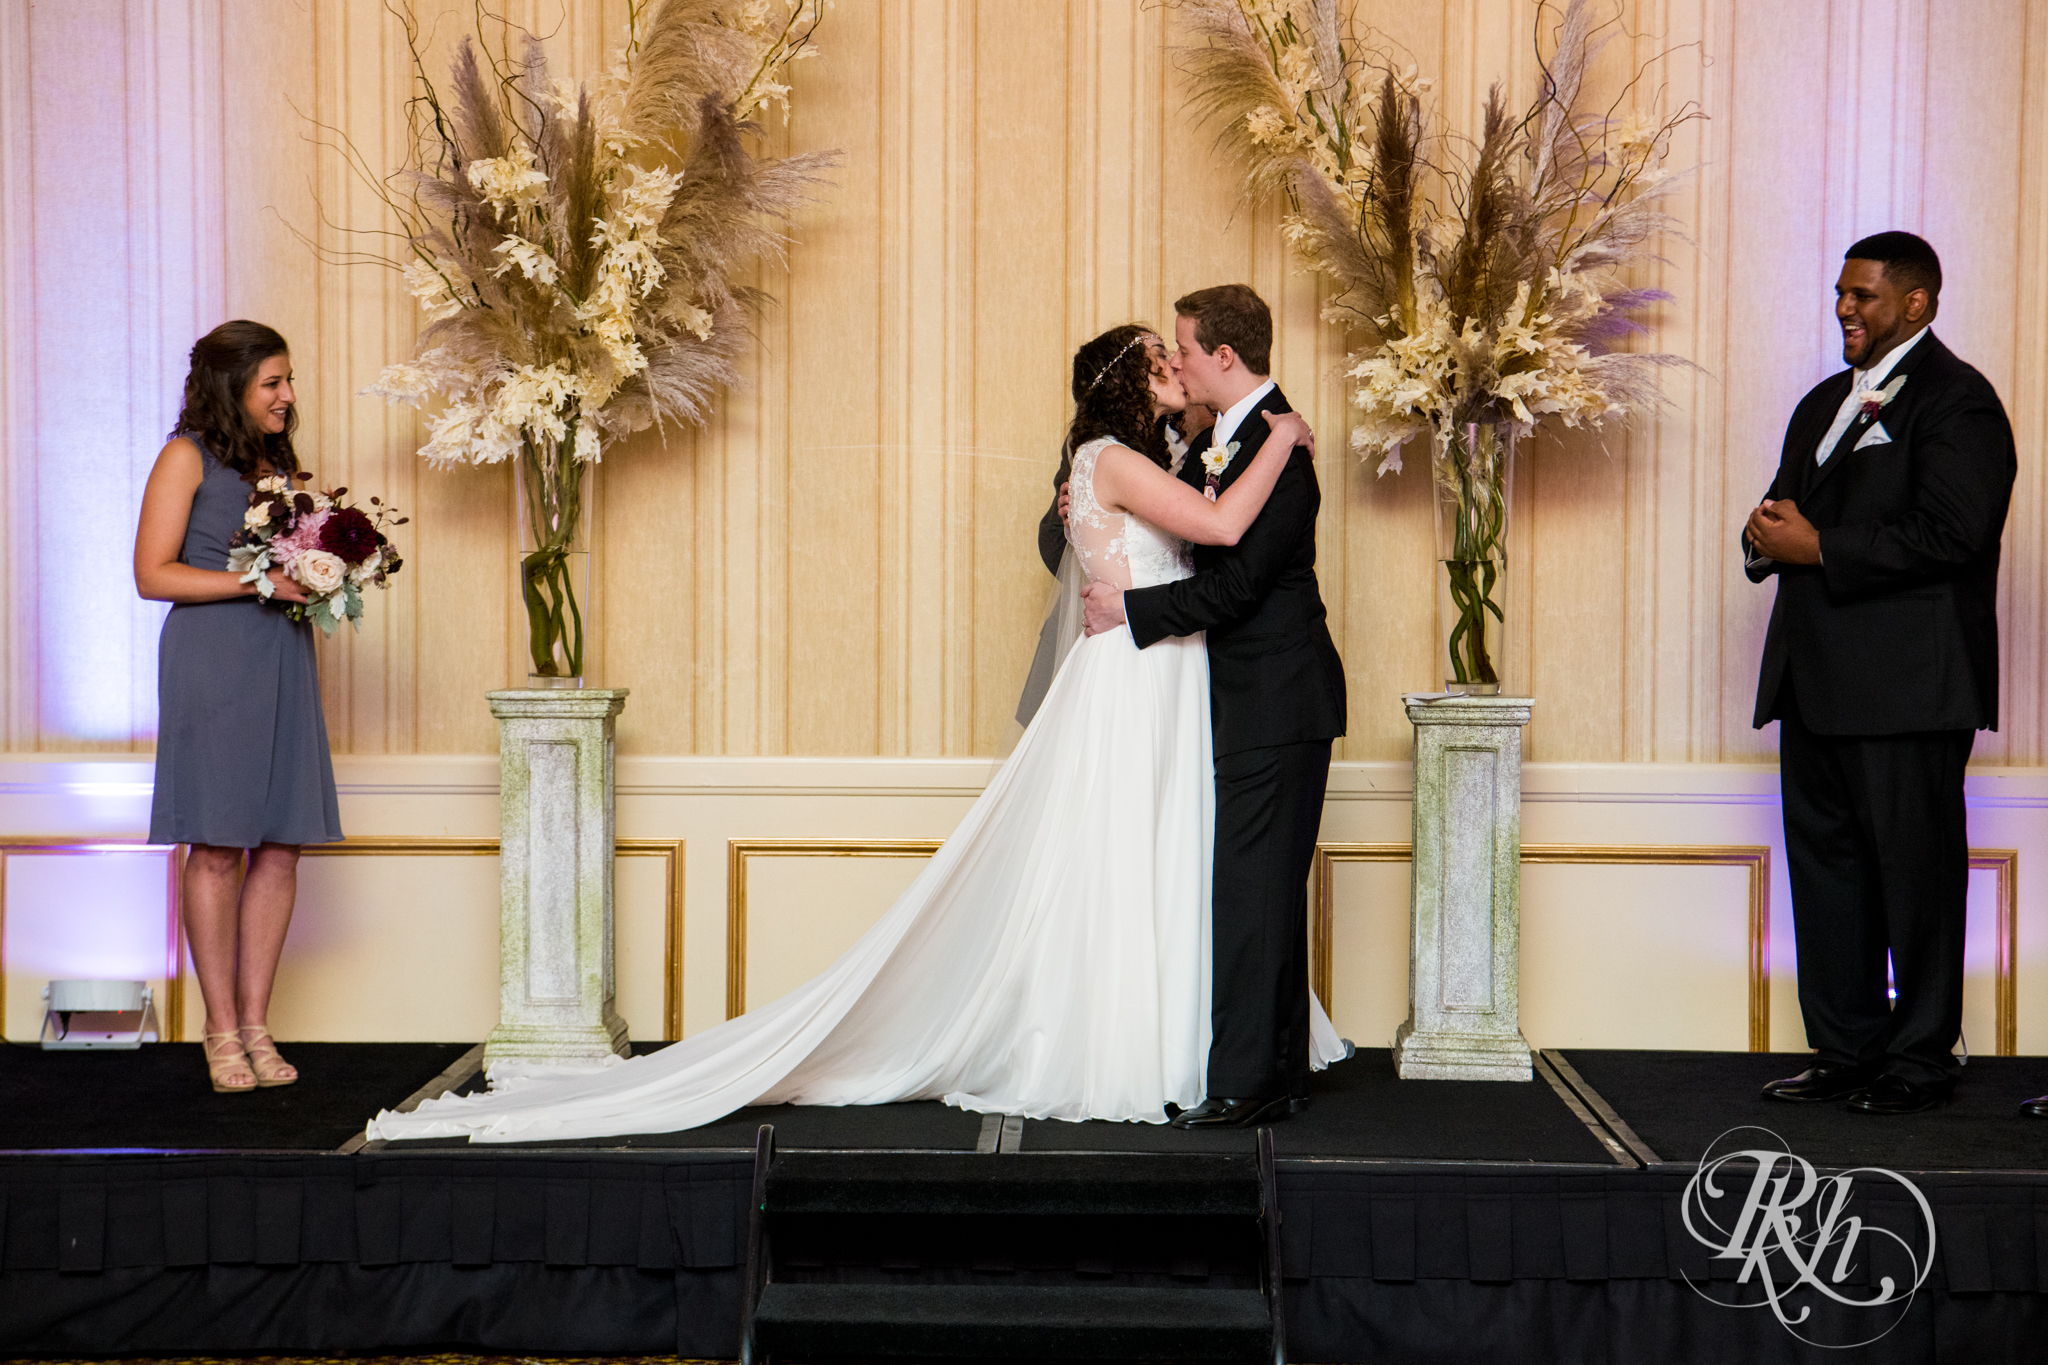 Bride and groom kiss during wedding ceremony at the Saint Paul Hotel in Saint Paul, Minnesota.